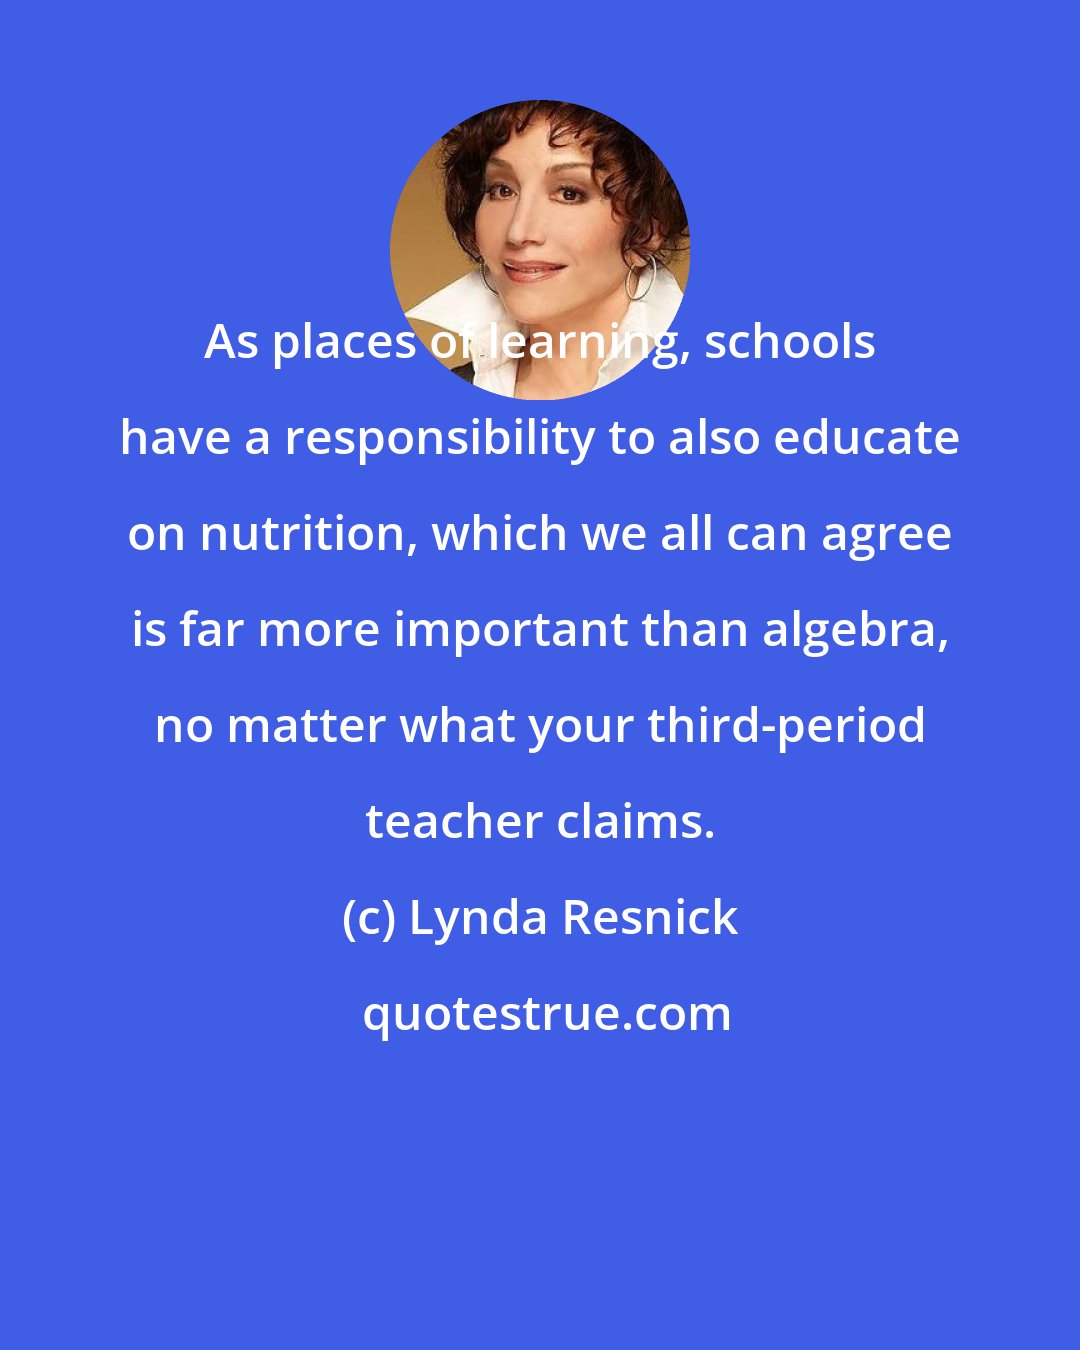 Lynda Resnick: As places of learning, schools have a responsibility to also educate on nutrition, which we all can agree is far more important than algebra, no matter what your third-period teacher claims.